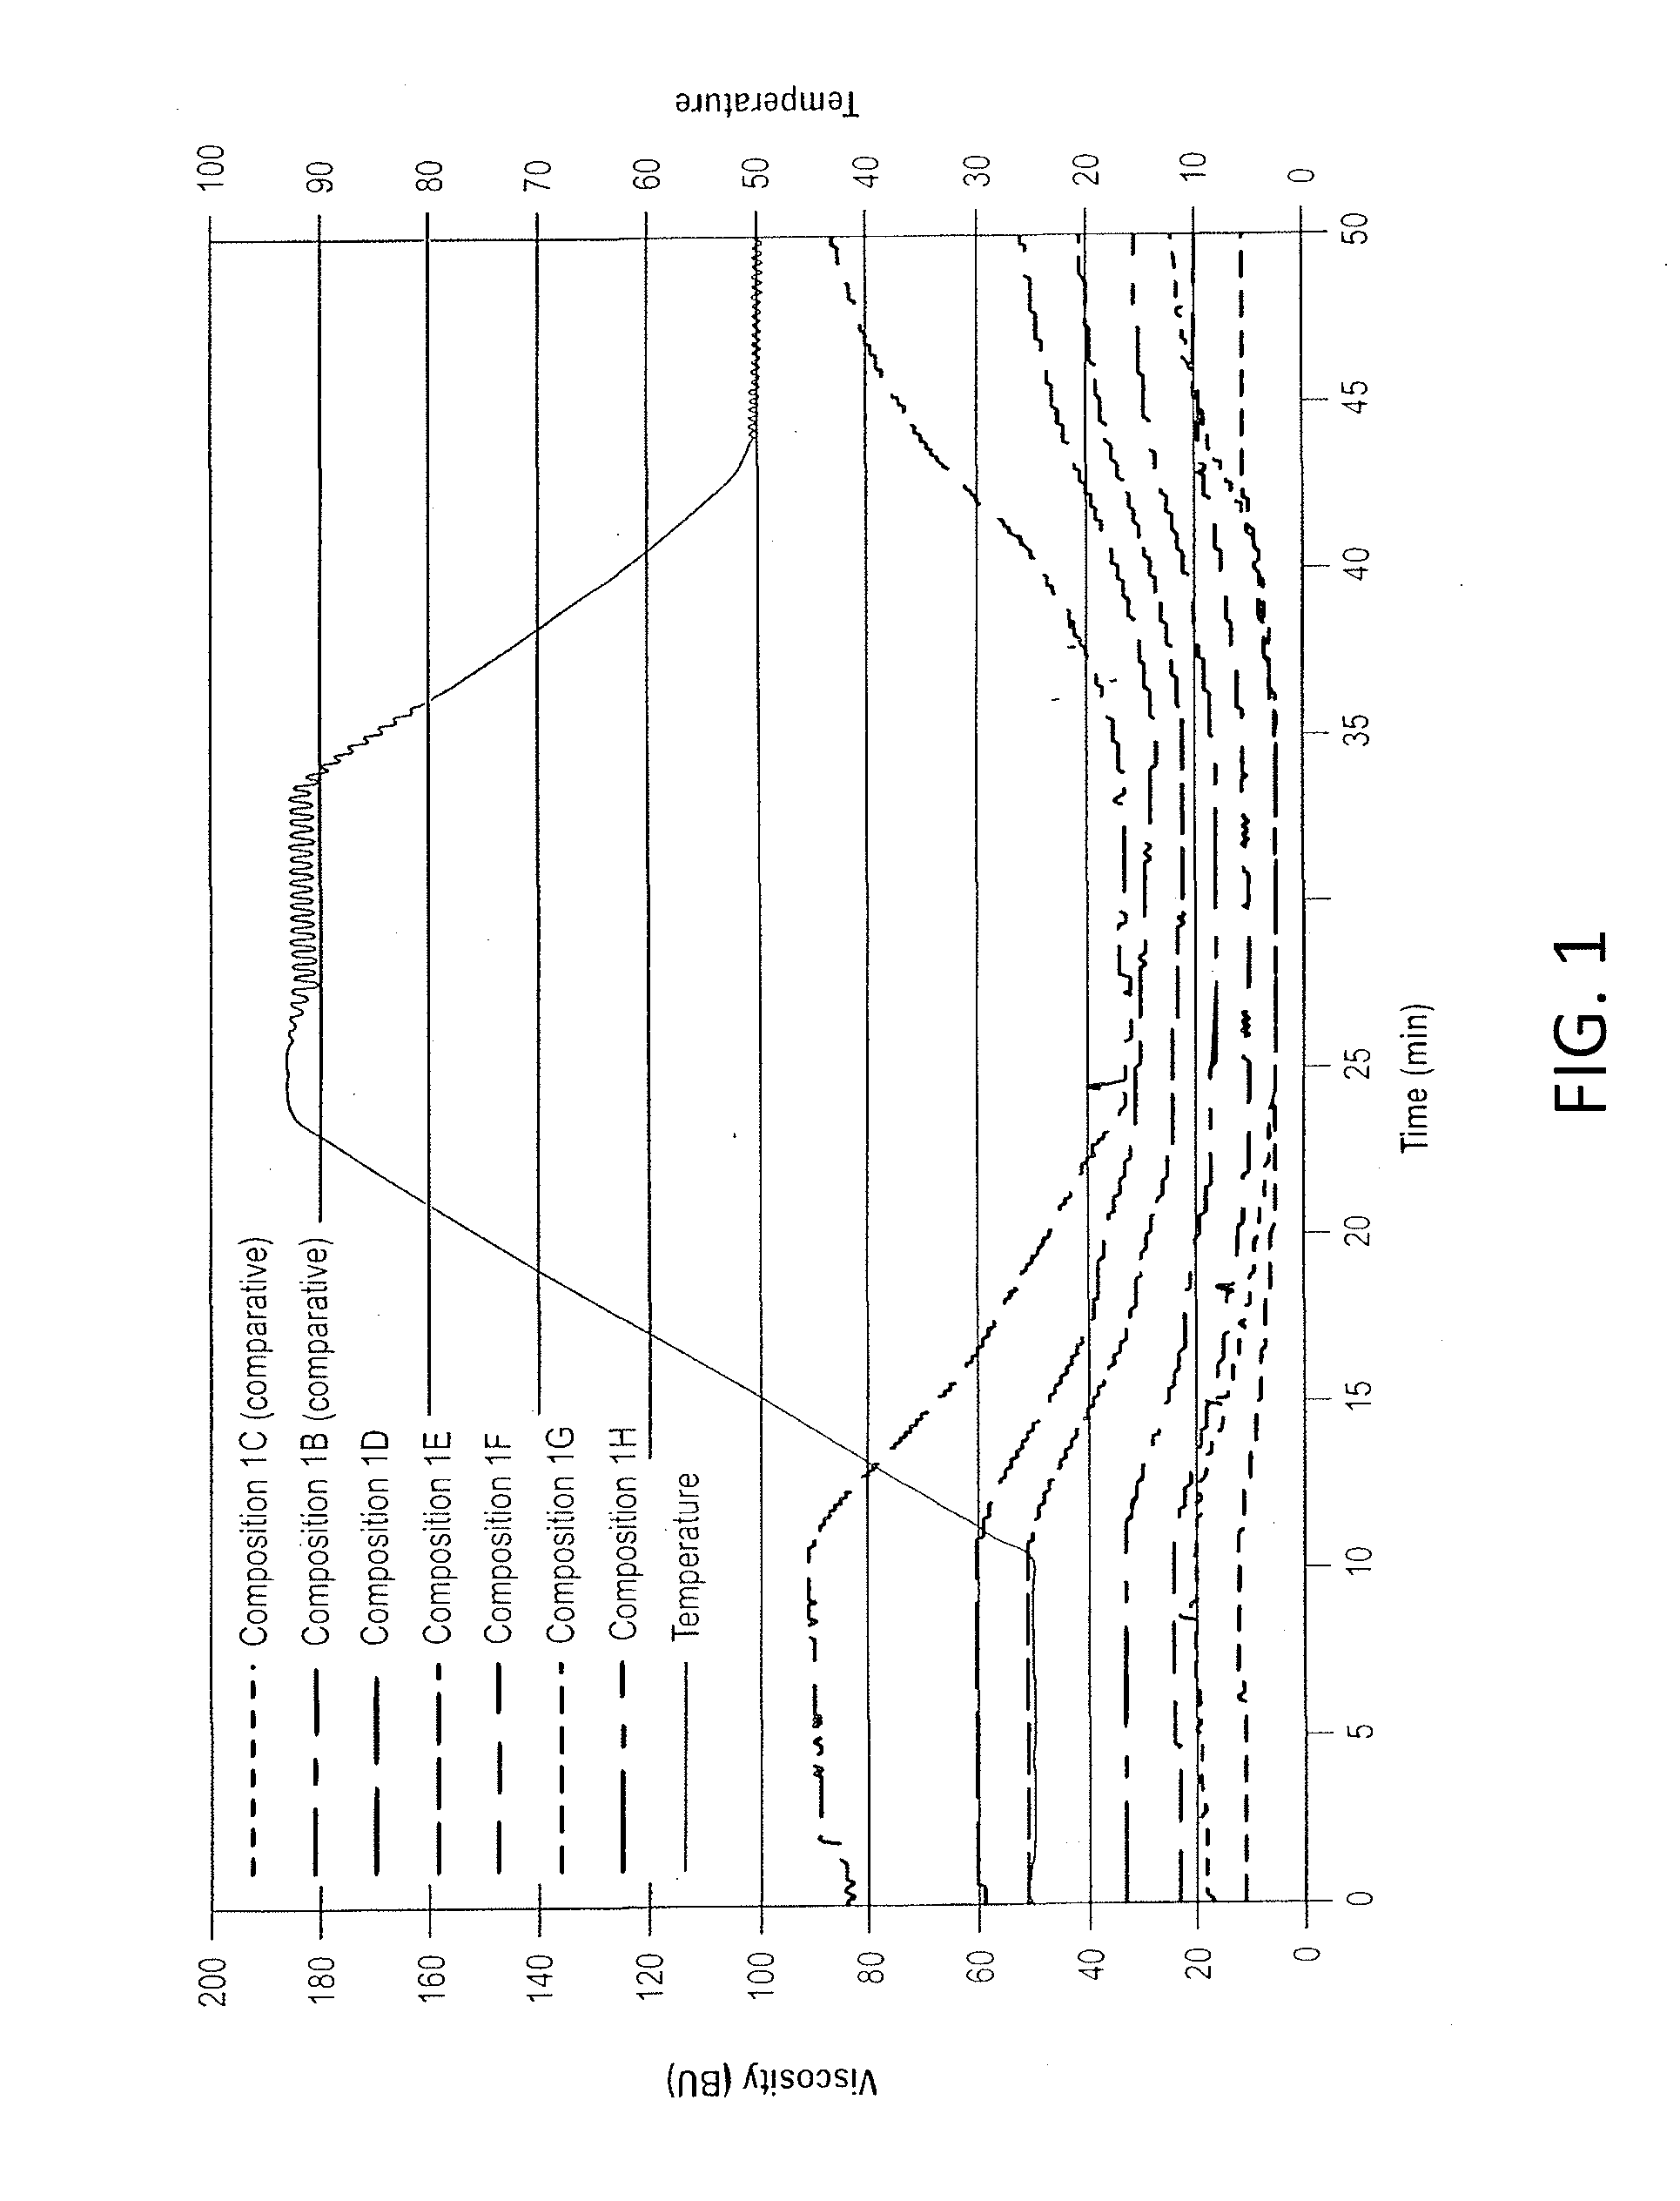 Method of preparing pregelatinized, partially hydrolyzed starch and related methods and products